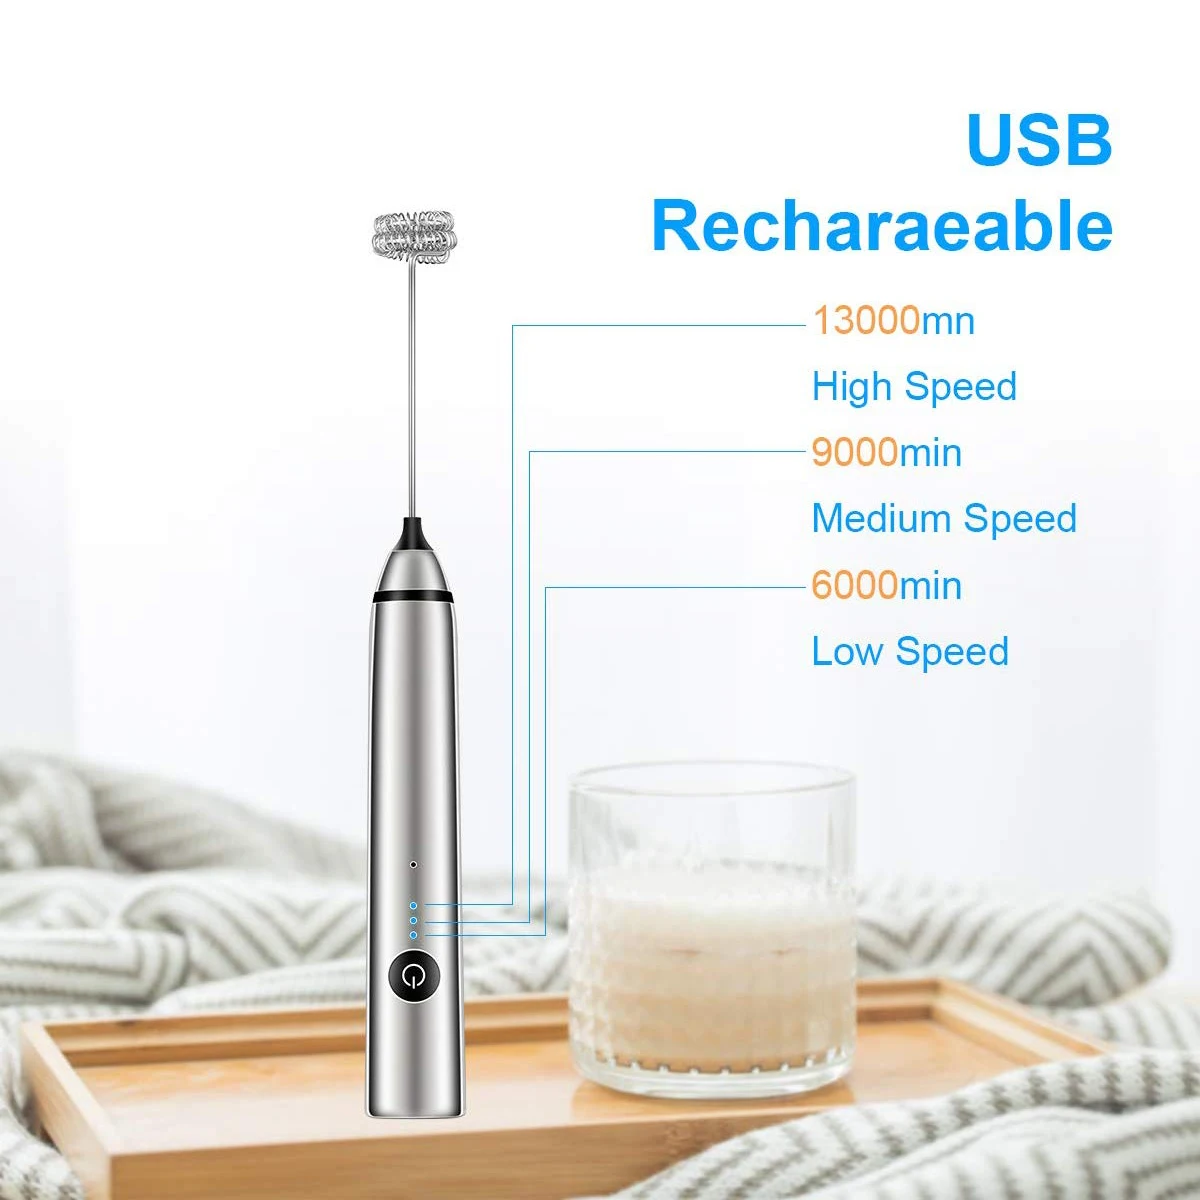 Hf20426dc88b049179eb2f14f0ba1b5bcL YAJIAO USB Rechargeable Blender Milk Frother Handheld Electric Mixer Foam Maker Stainless Whisk 3 Speed for Coffee Cappuccino